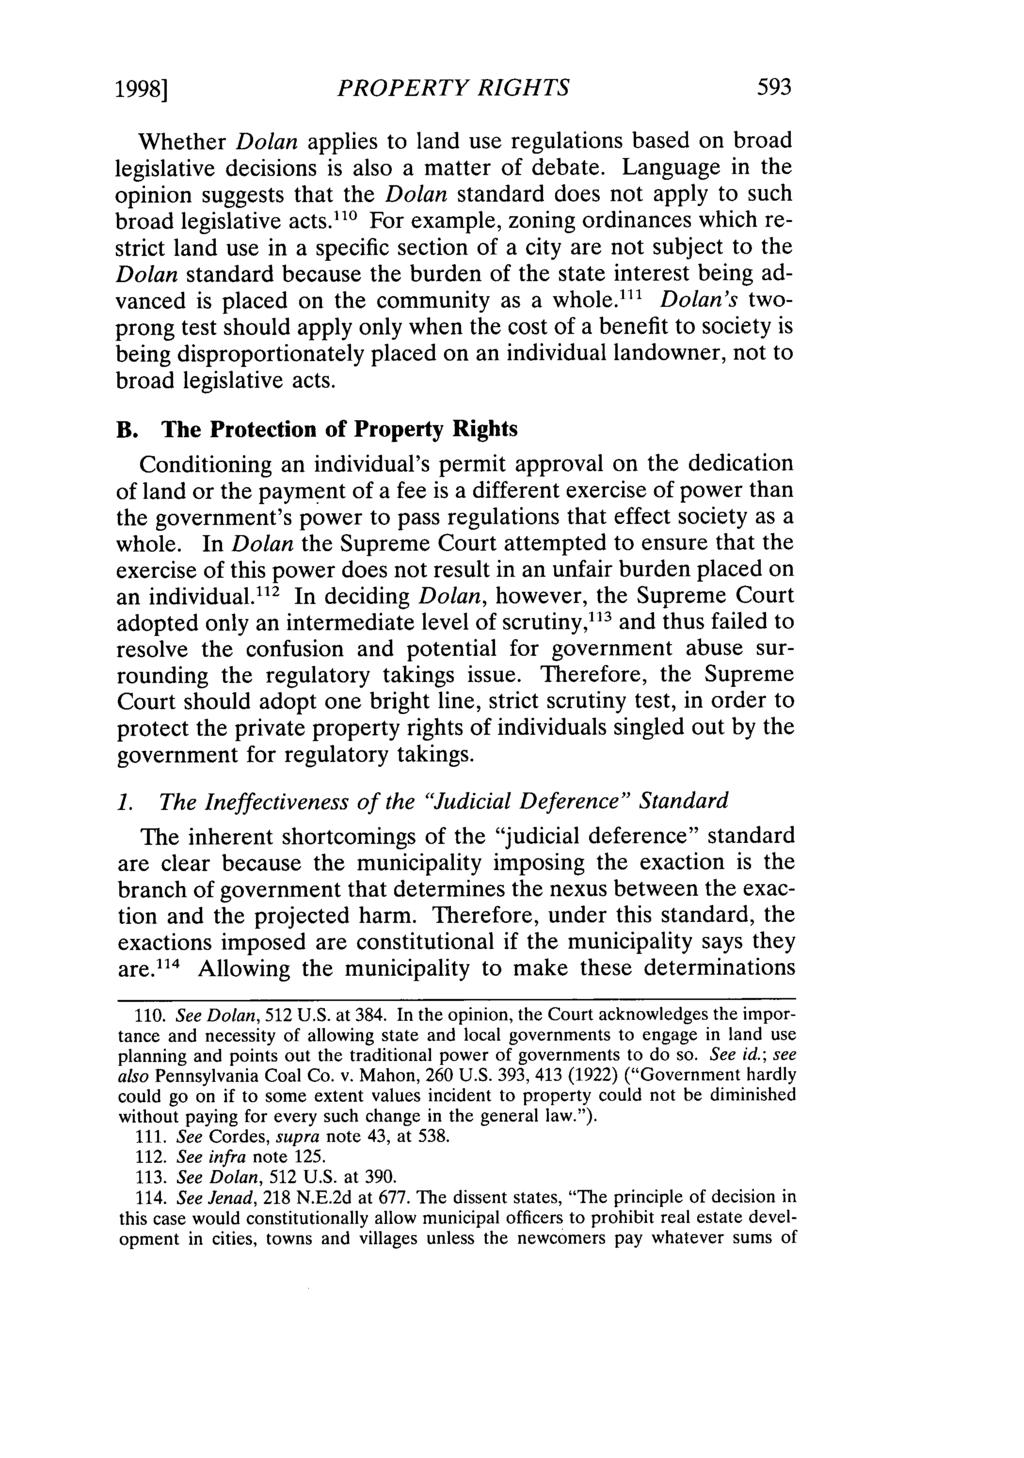 1998] PROPERTY RIGHTS Whether Dolan applies to land use regulations based on broad legislative decisions is also a matter of debate.